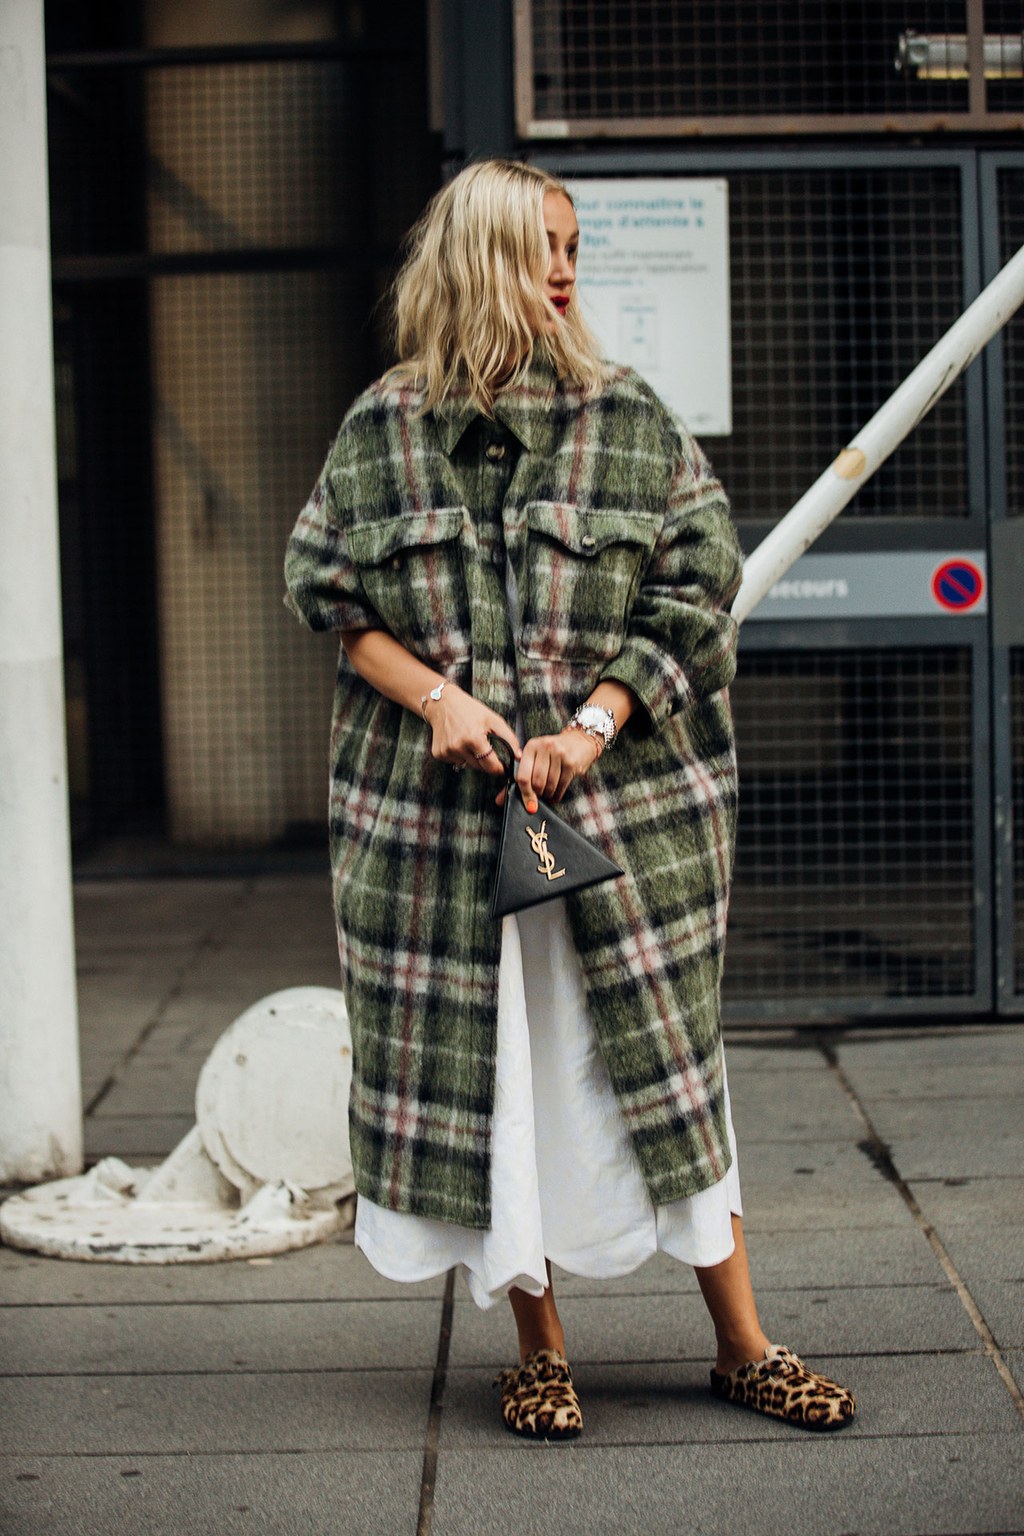 This Street Style Look Is the Epitome of Cozy-Cool